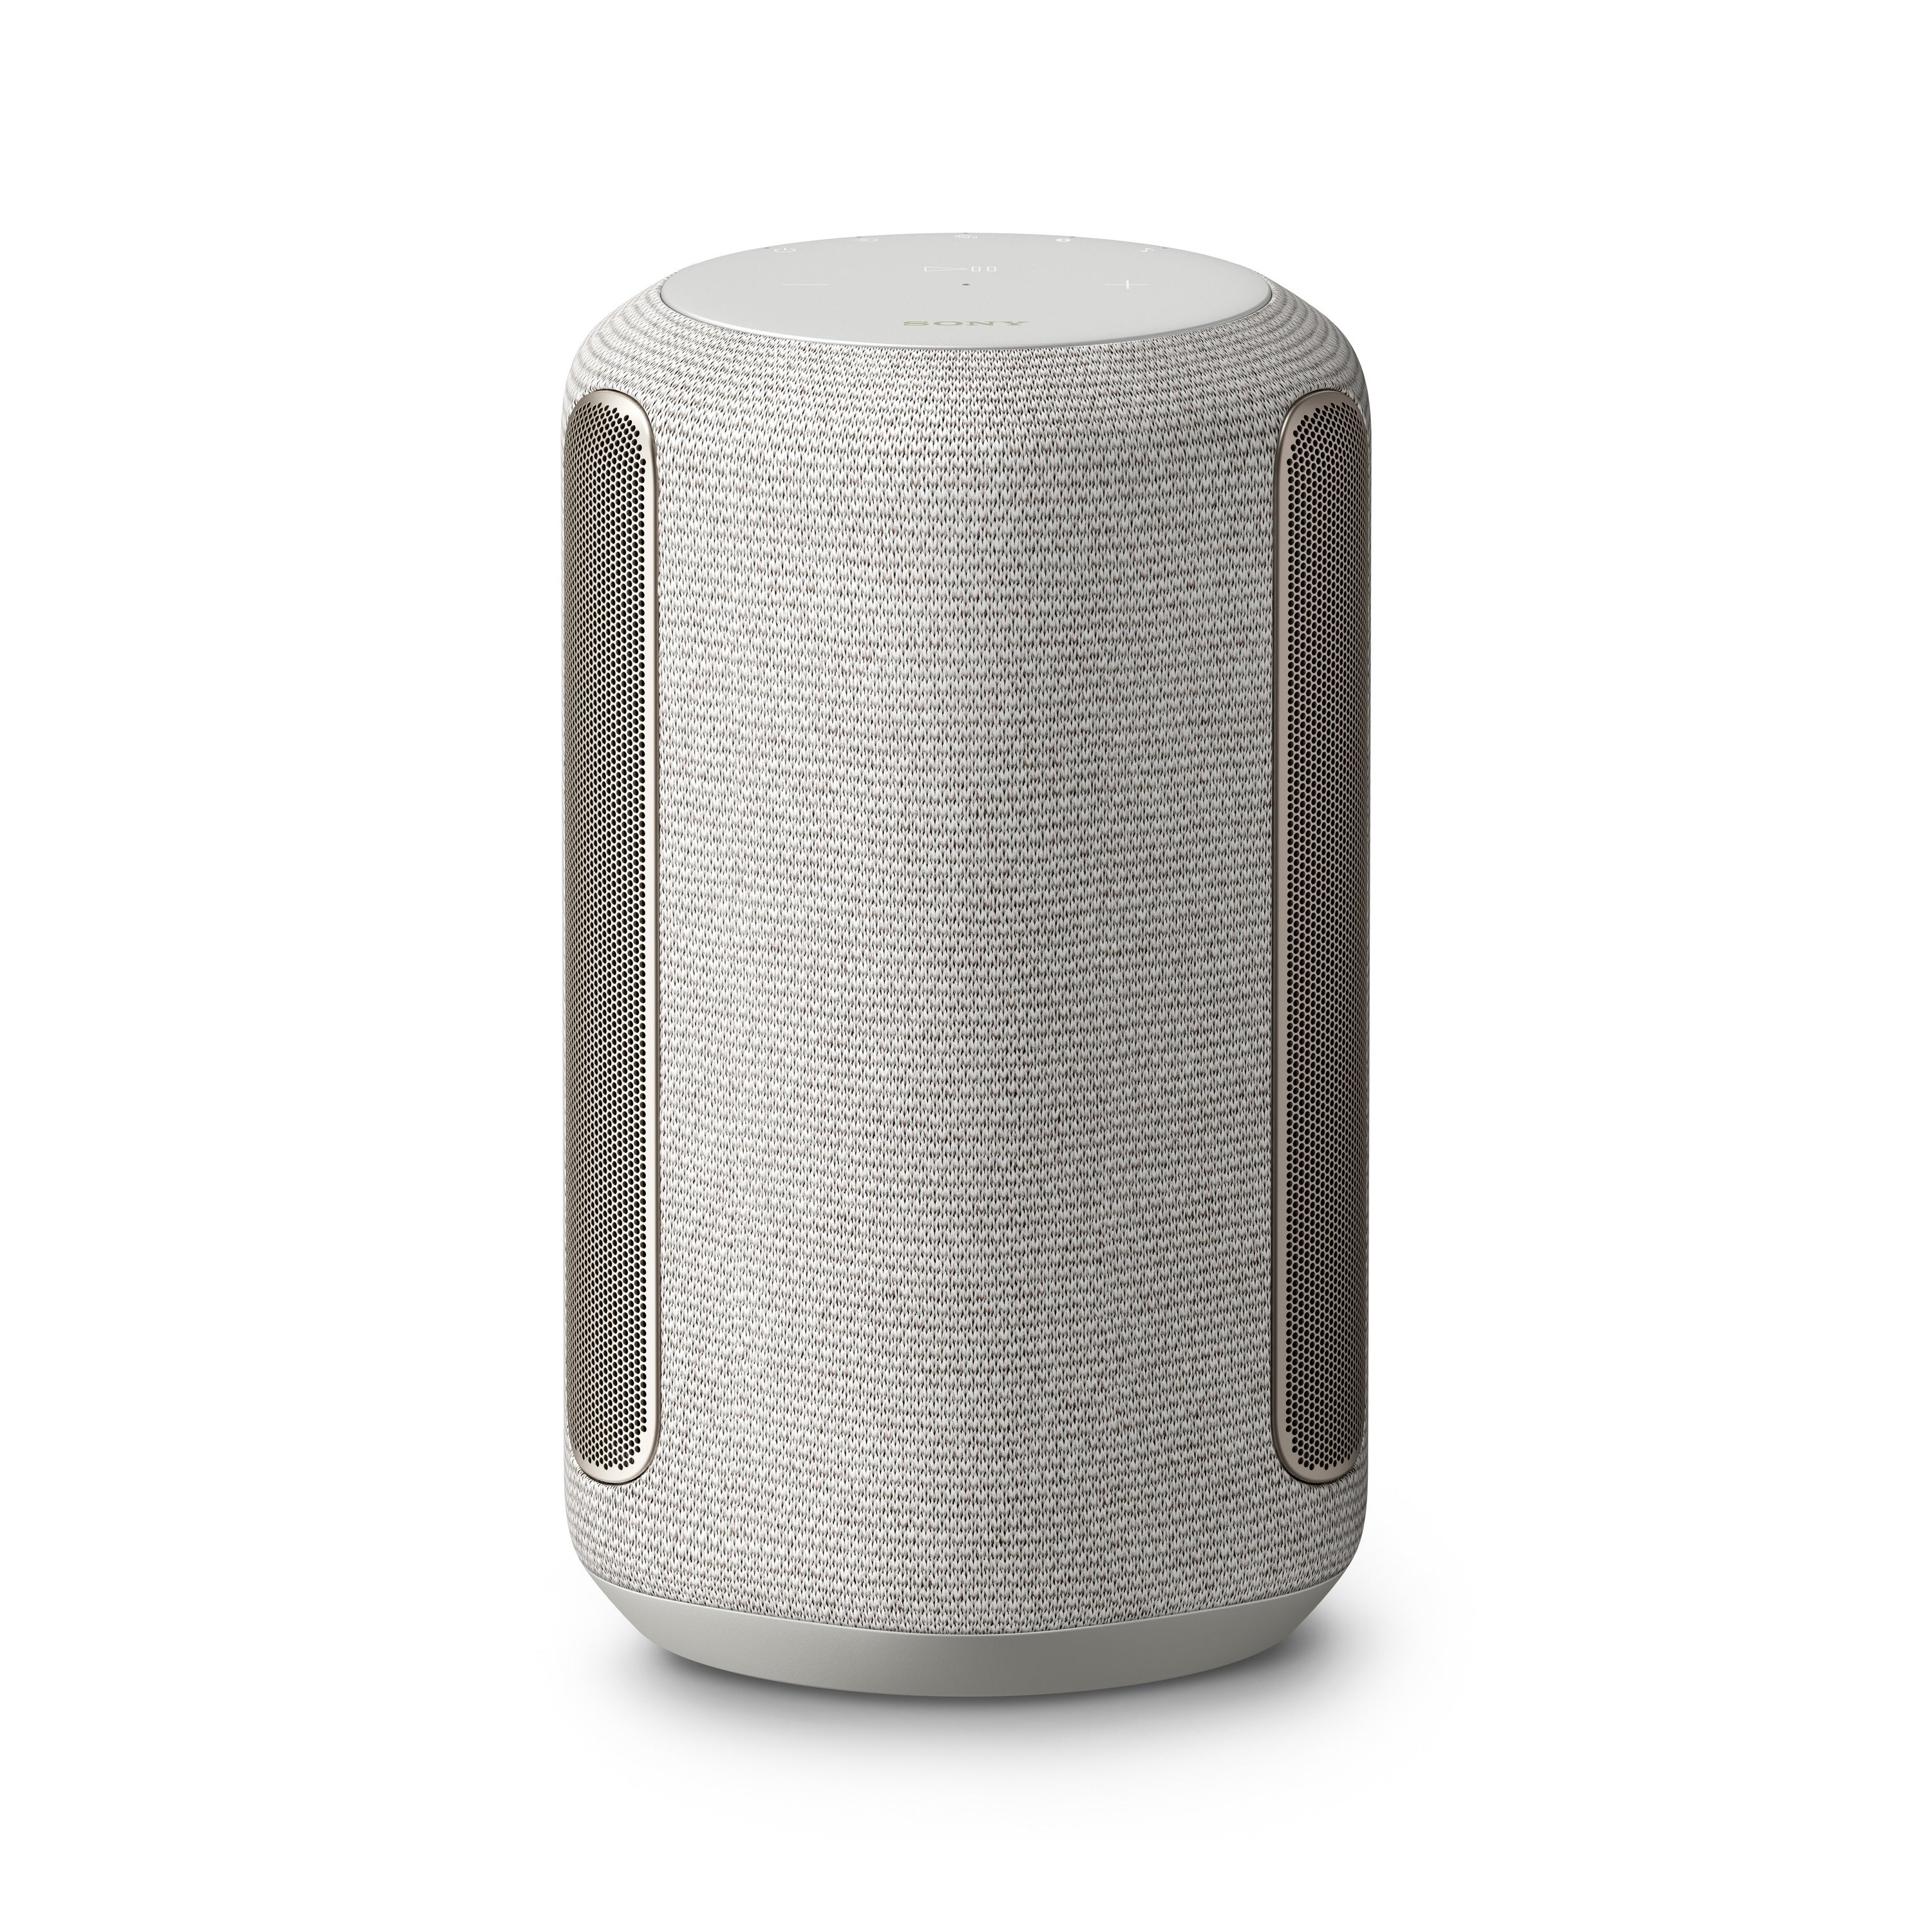 SRS-RA3000 Premium Wireless Speaker with Ambient Room-filling Sound (Light Grey)